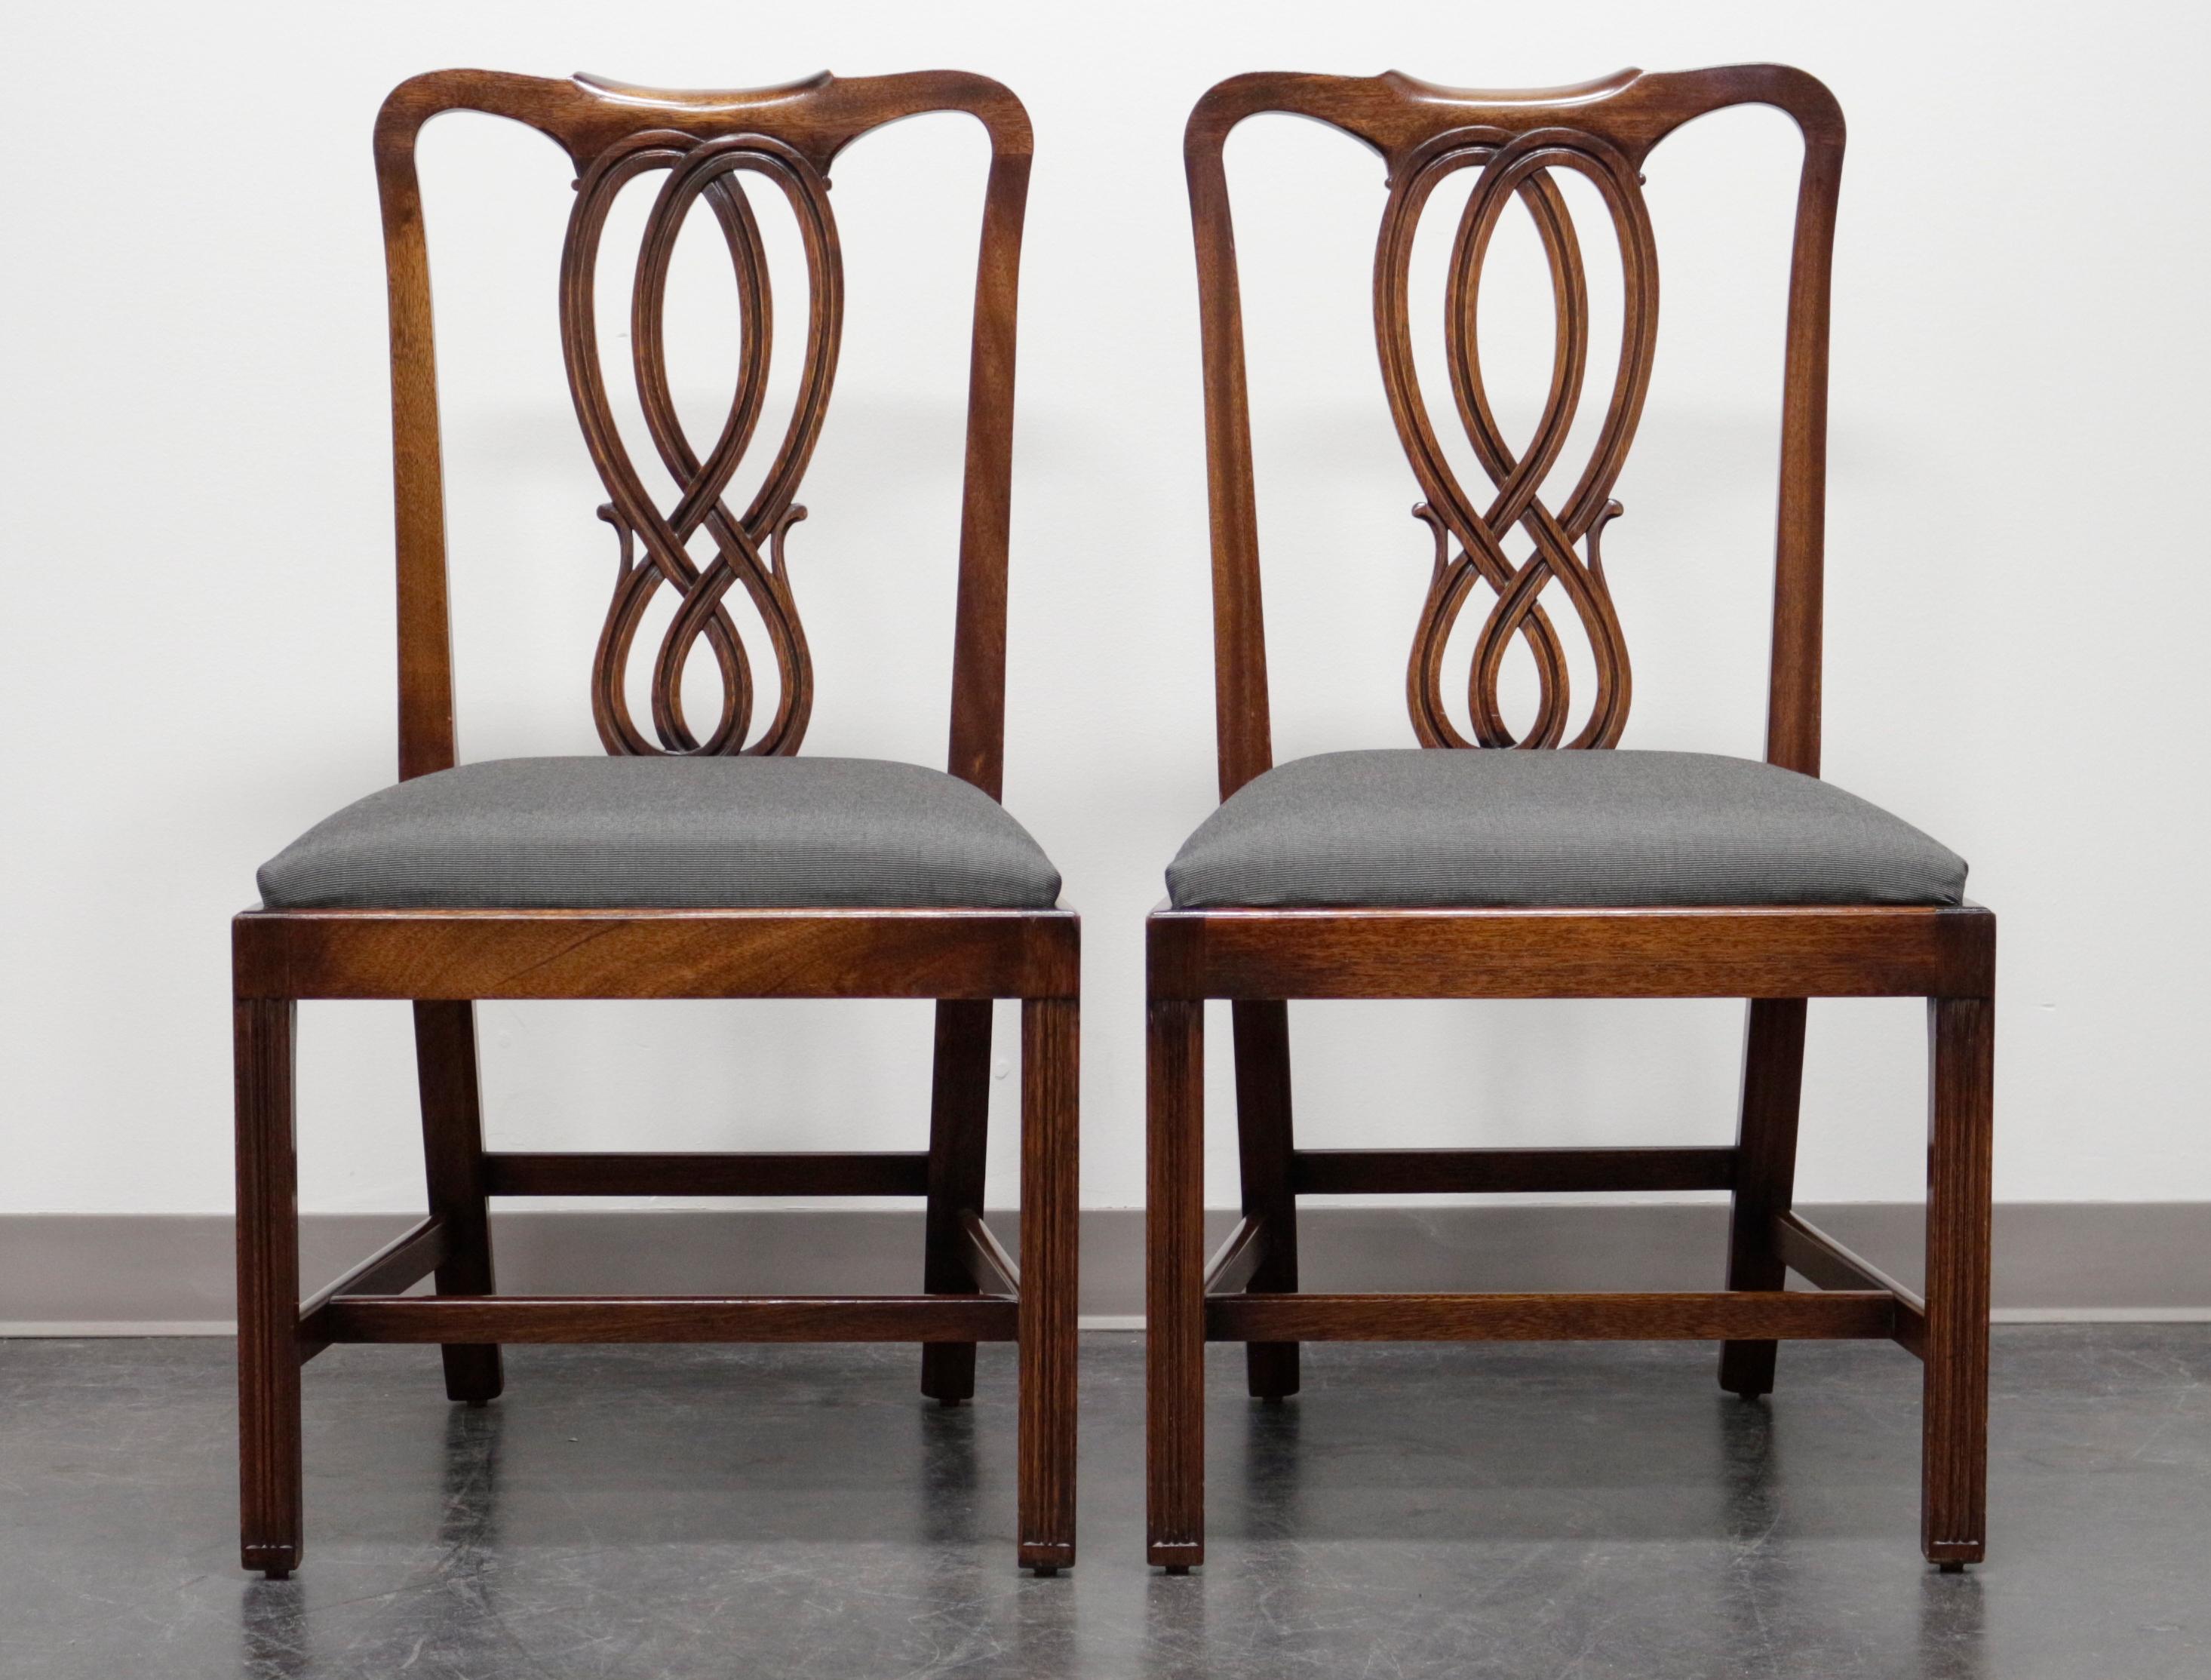 A fine pair of Georgian style dining side chairs in solid Mahogany by Bevan Funnell. Made in England in the late 20th century. Newly re-upholstered seats.

Style # 210/0215

Measures: 22 W 22.5 D 40 H, Seat: 21 W 18 D 20 H

Exceptionally good